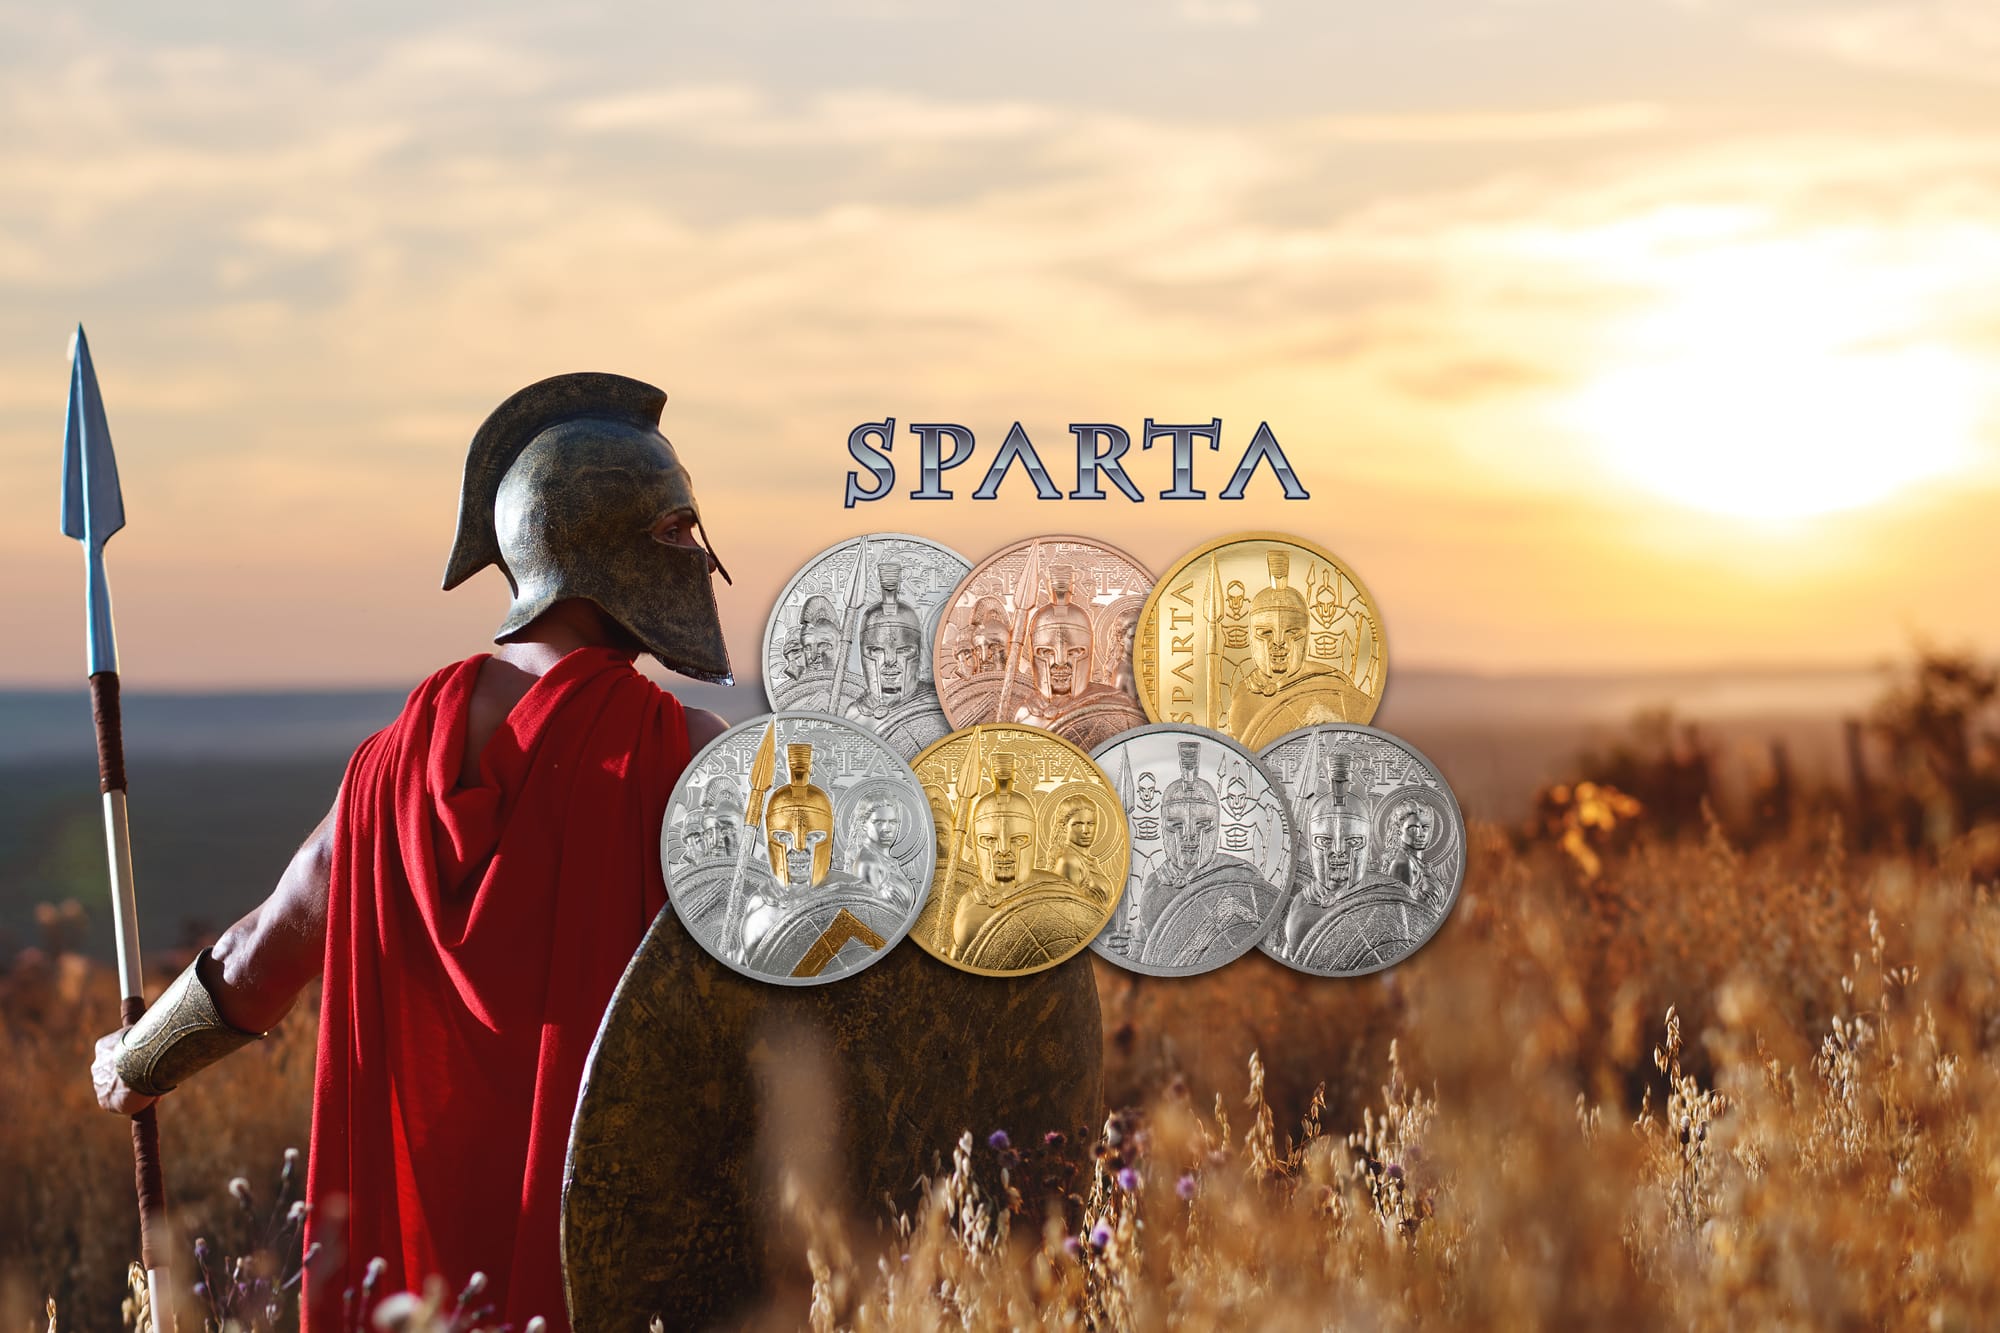 Sparta silver, gold, platinum, and copper coin collection